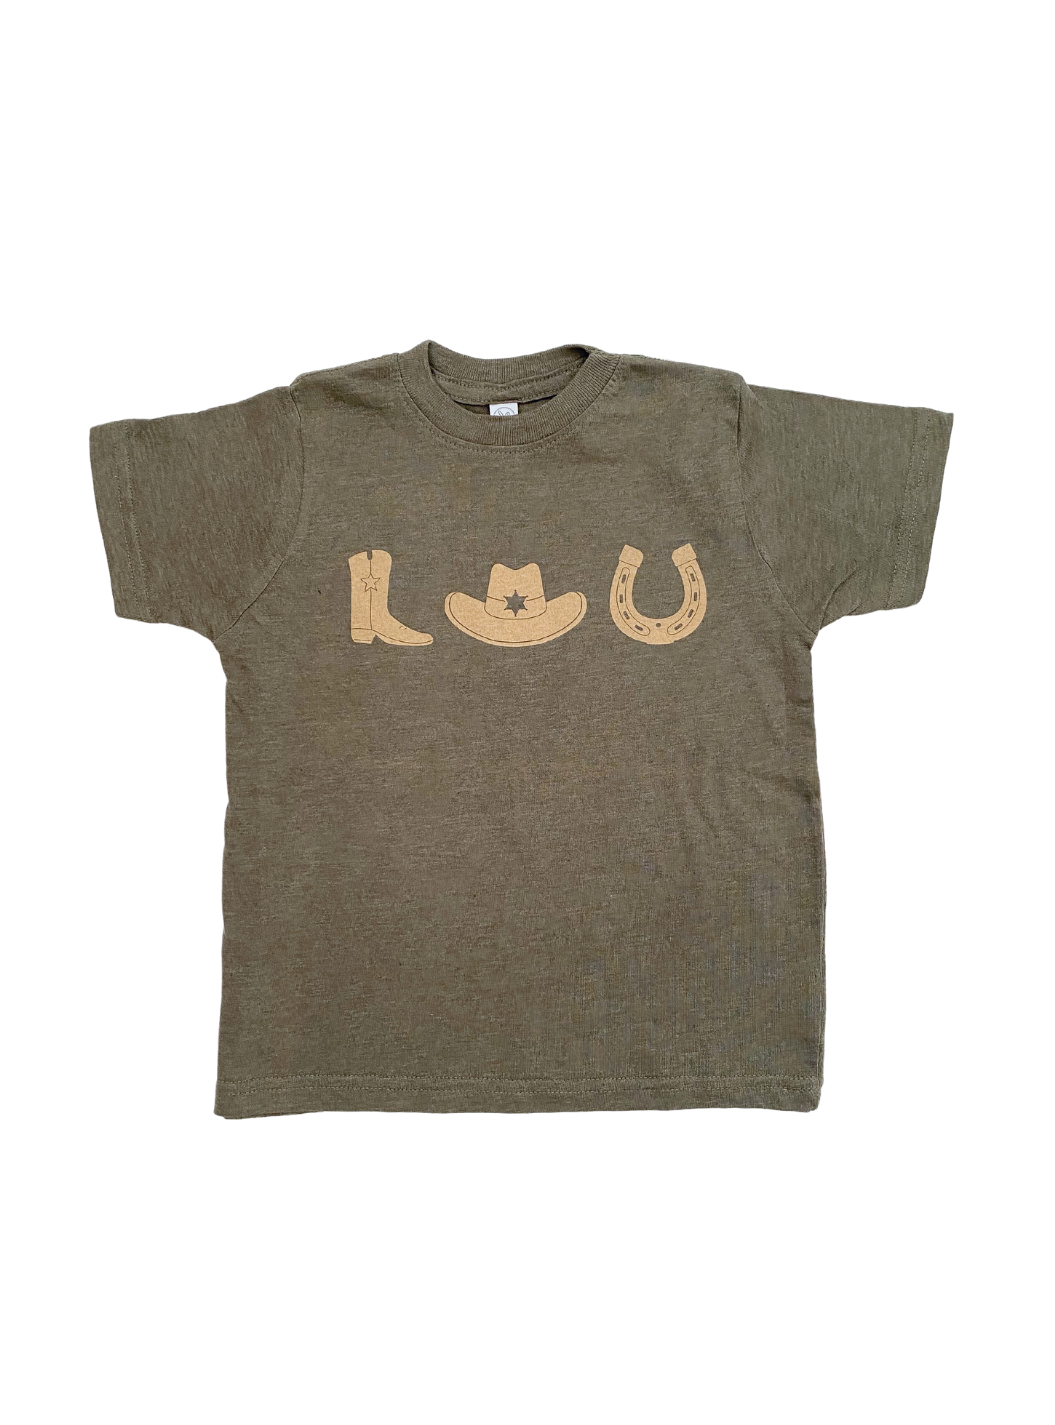 LUCKY COWBOY TODDLER GRAPHIC TEE